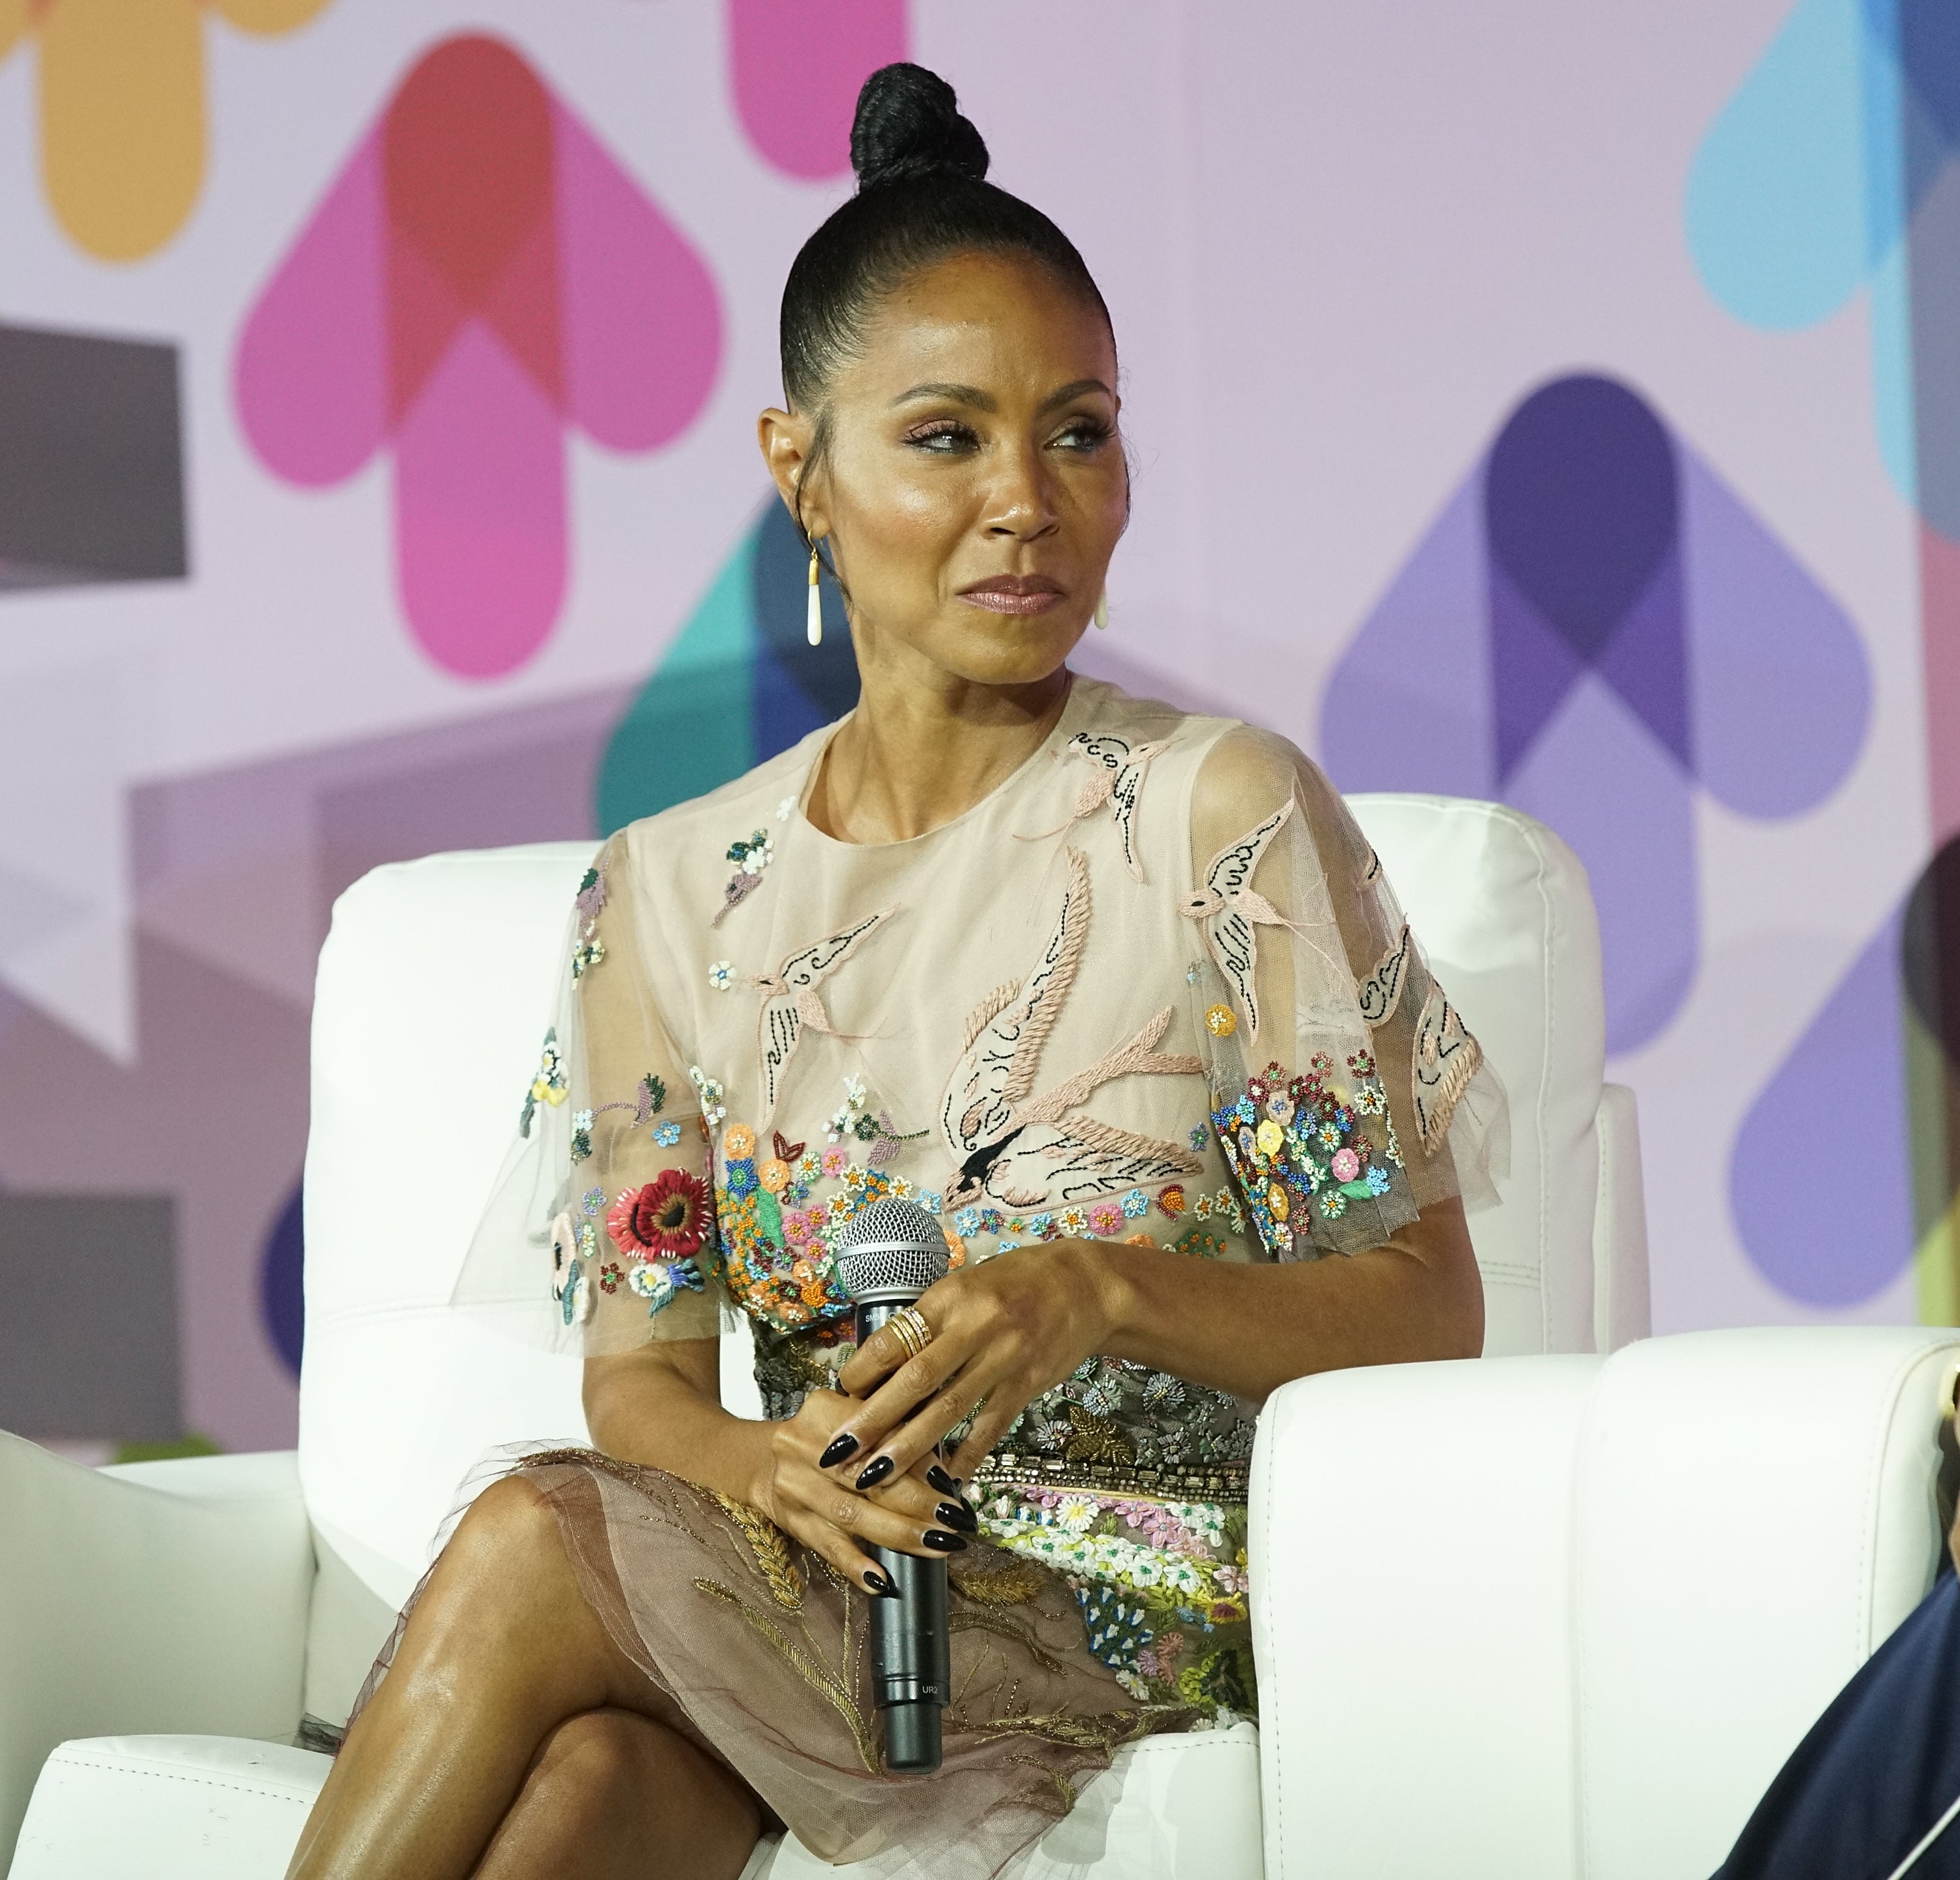 Jada Pinkett Smith On ‘All Eyez On Me’ Film: 'It Was Exploitive Of Me And Pac'
